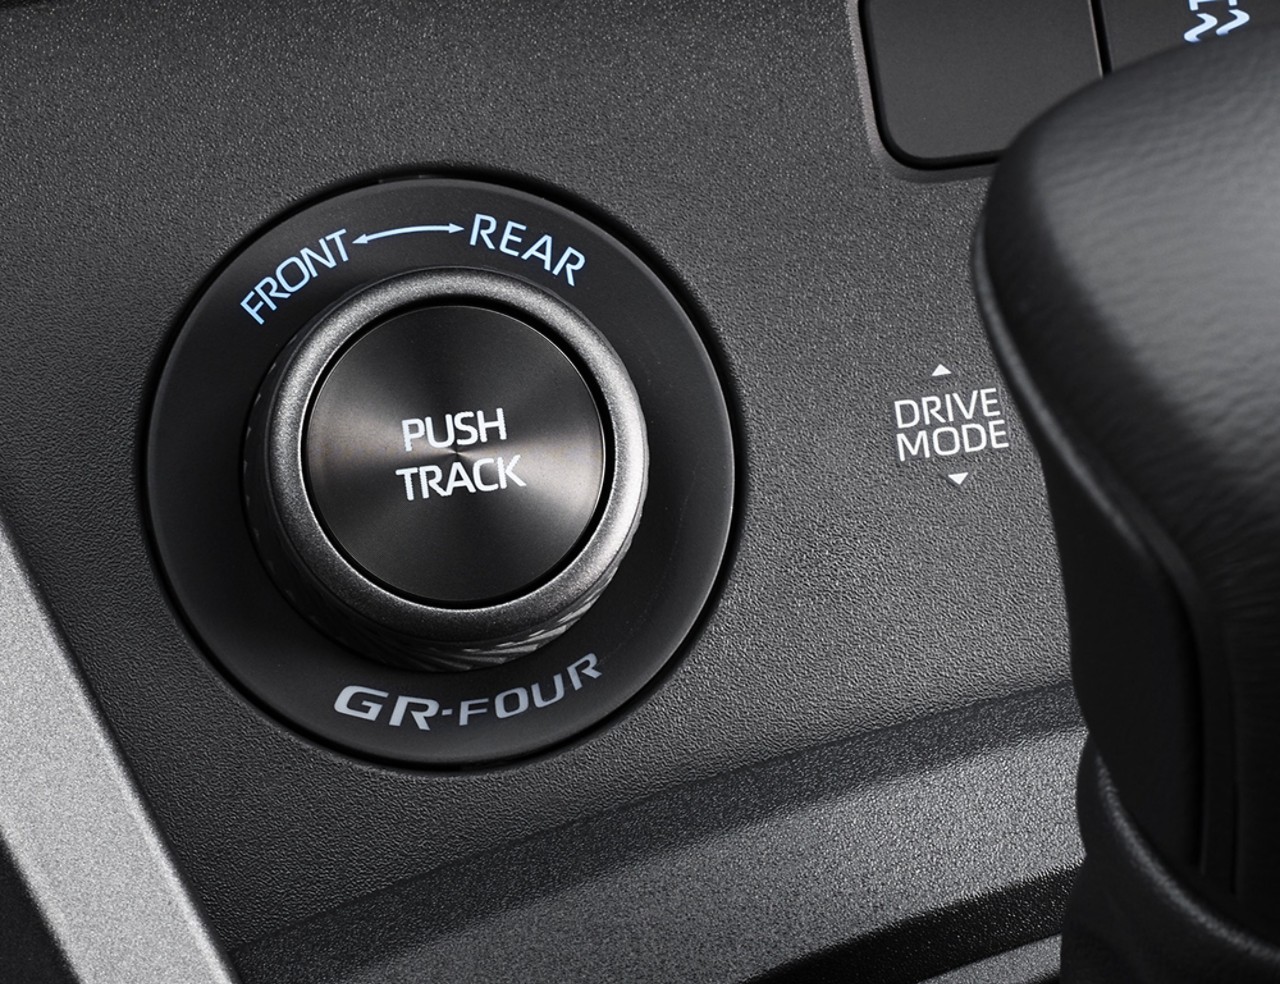 Close up of the driving mode button